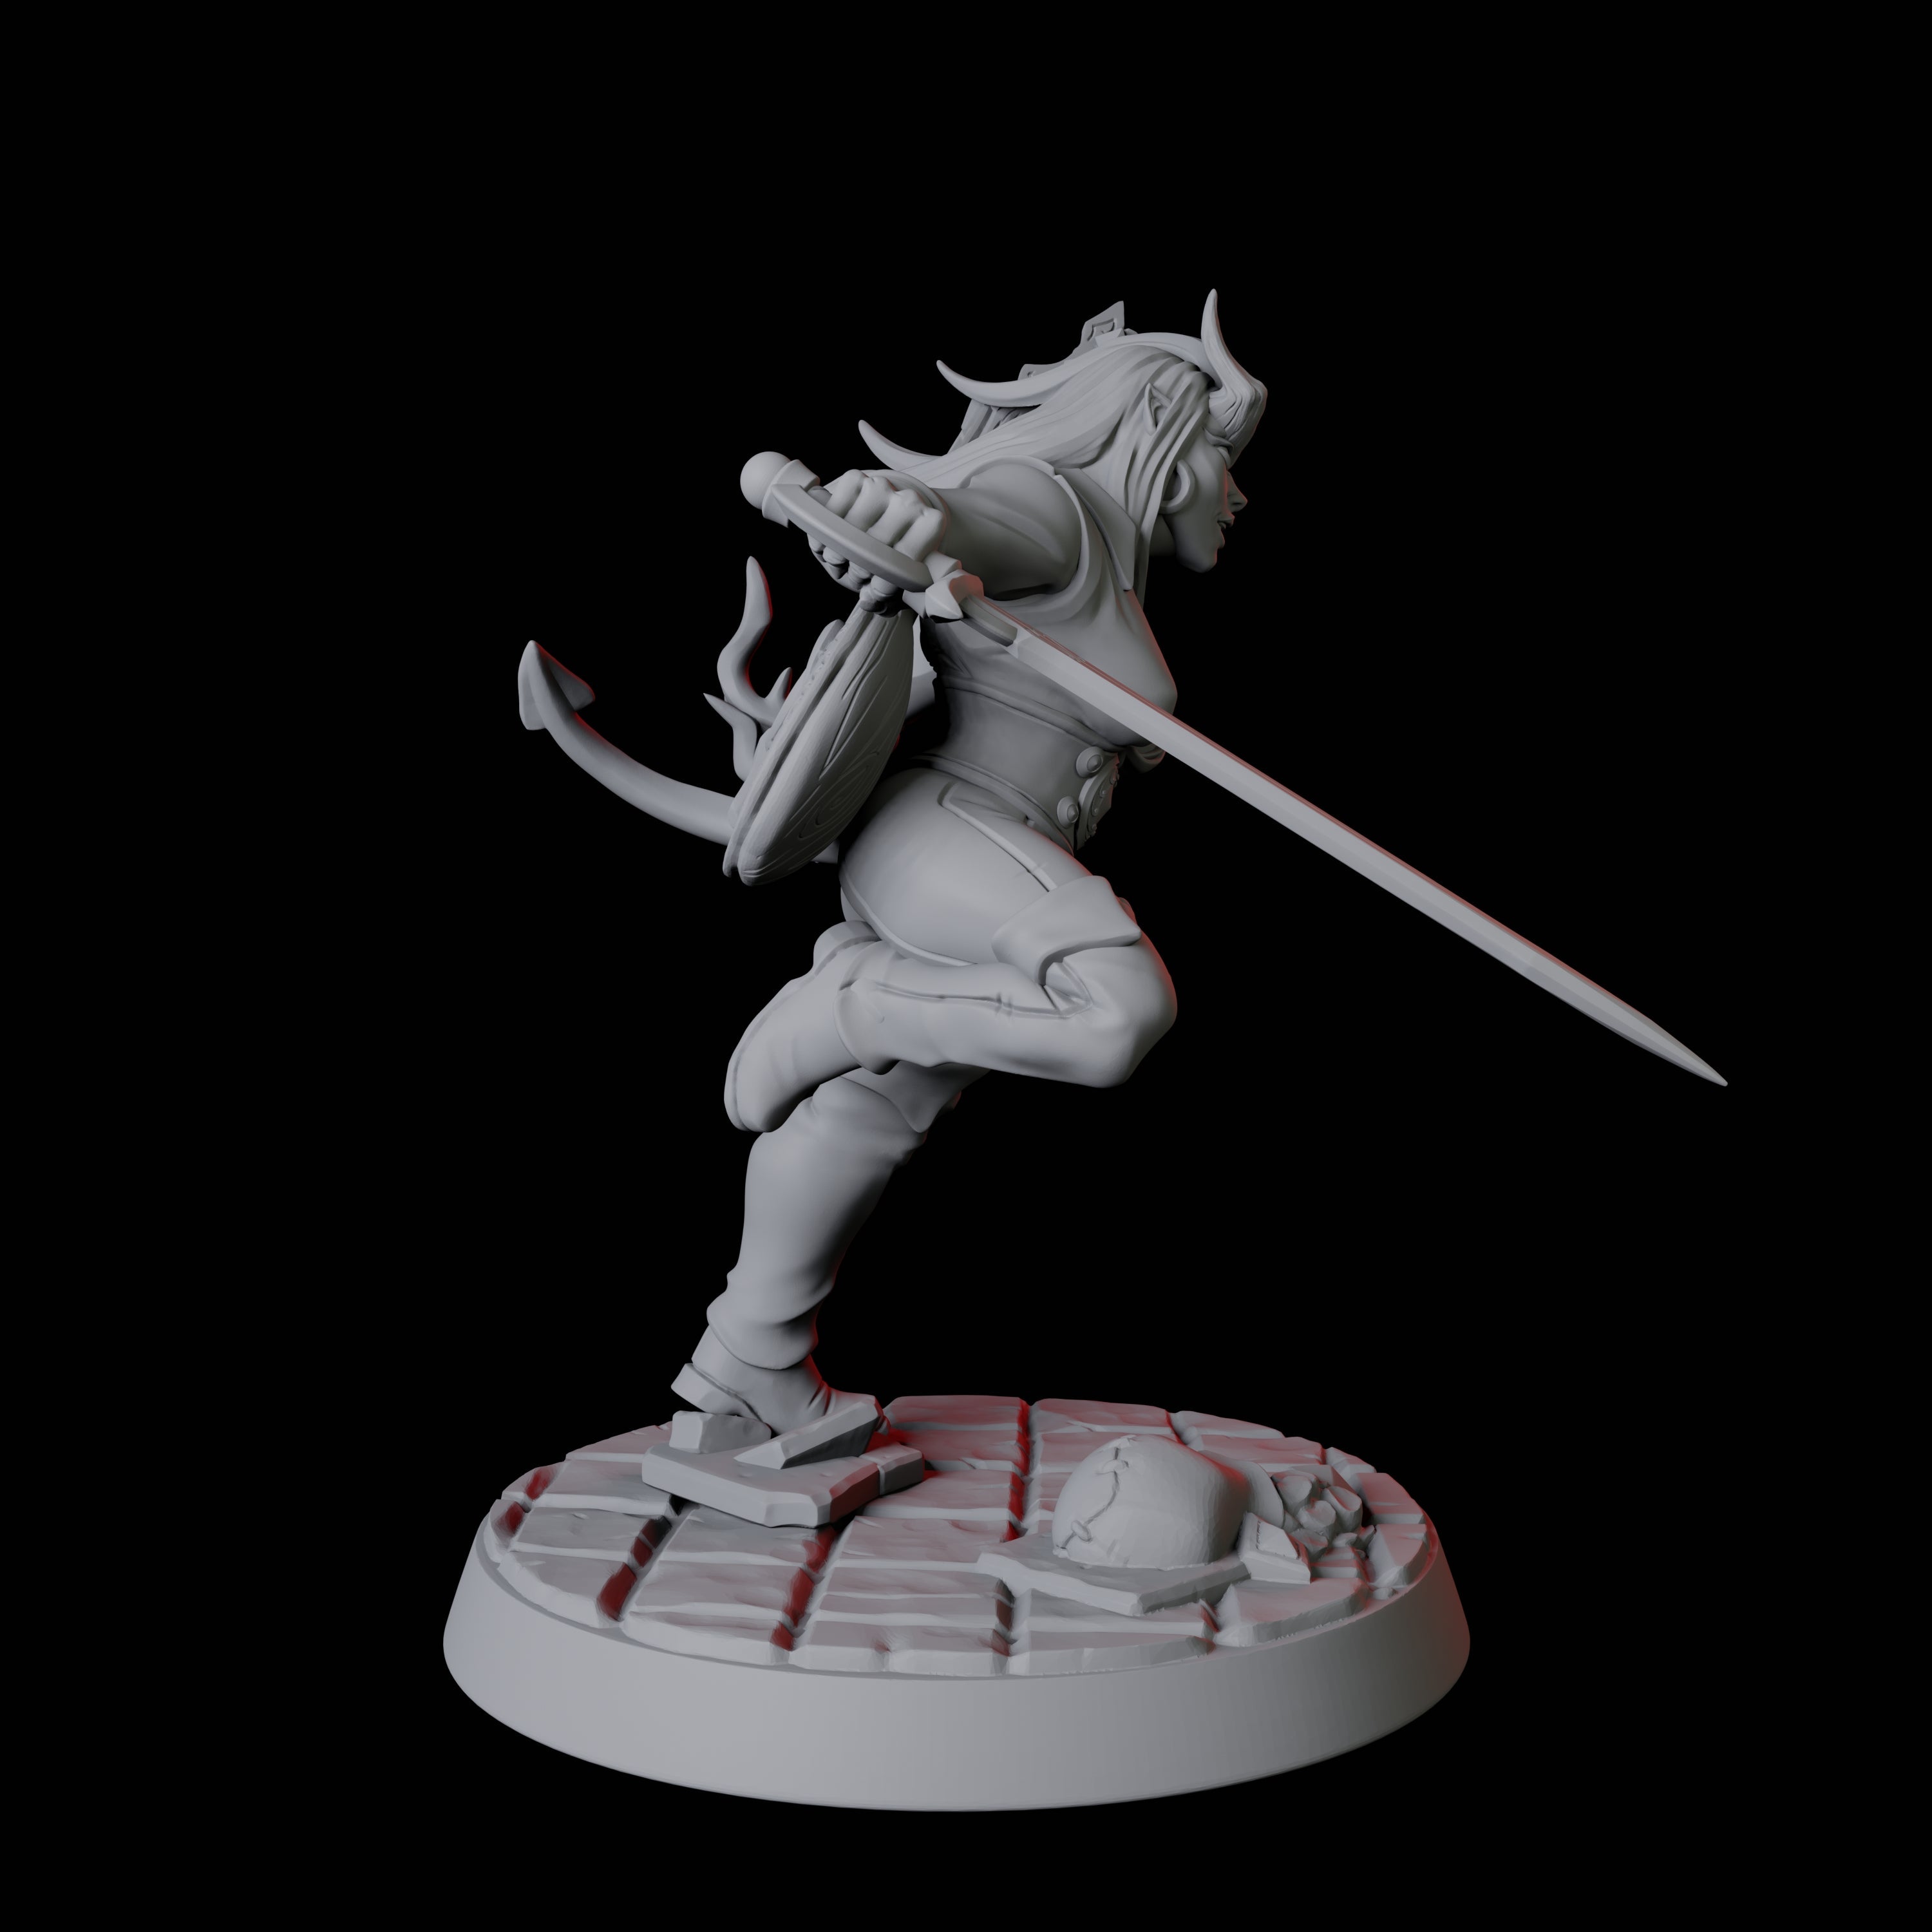 Tiefling Bard D Miniature for Dungeons and Dragons, Pathfinder or other TTRPGs